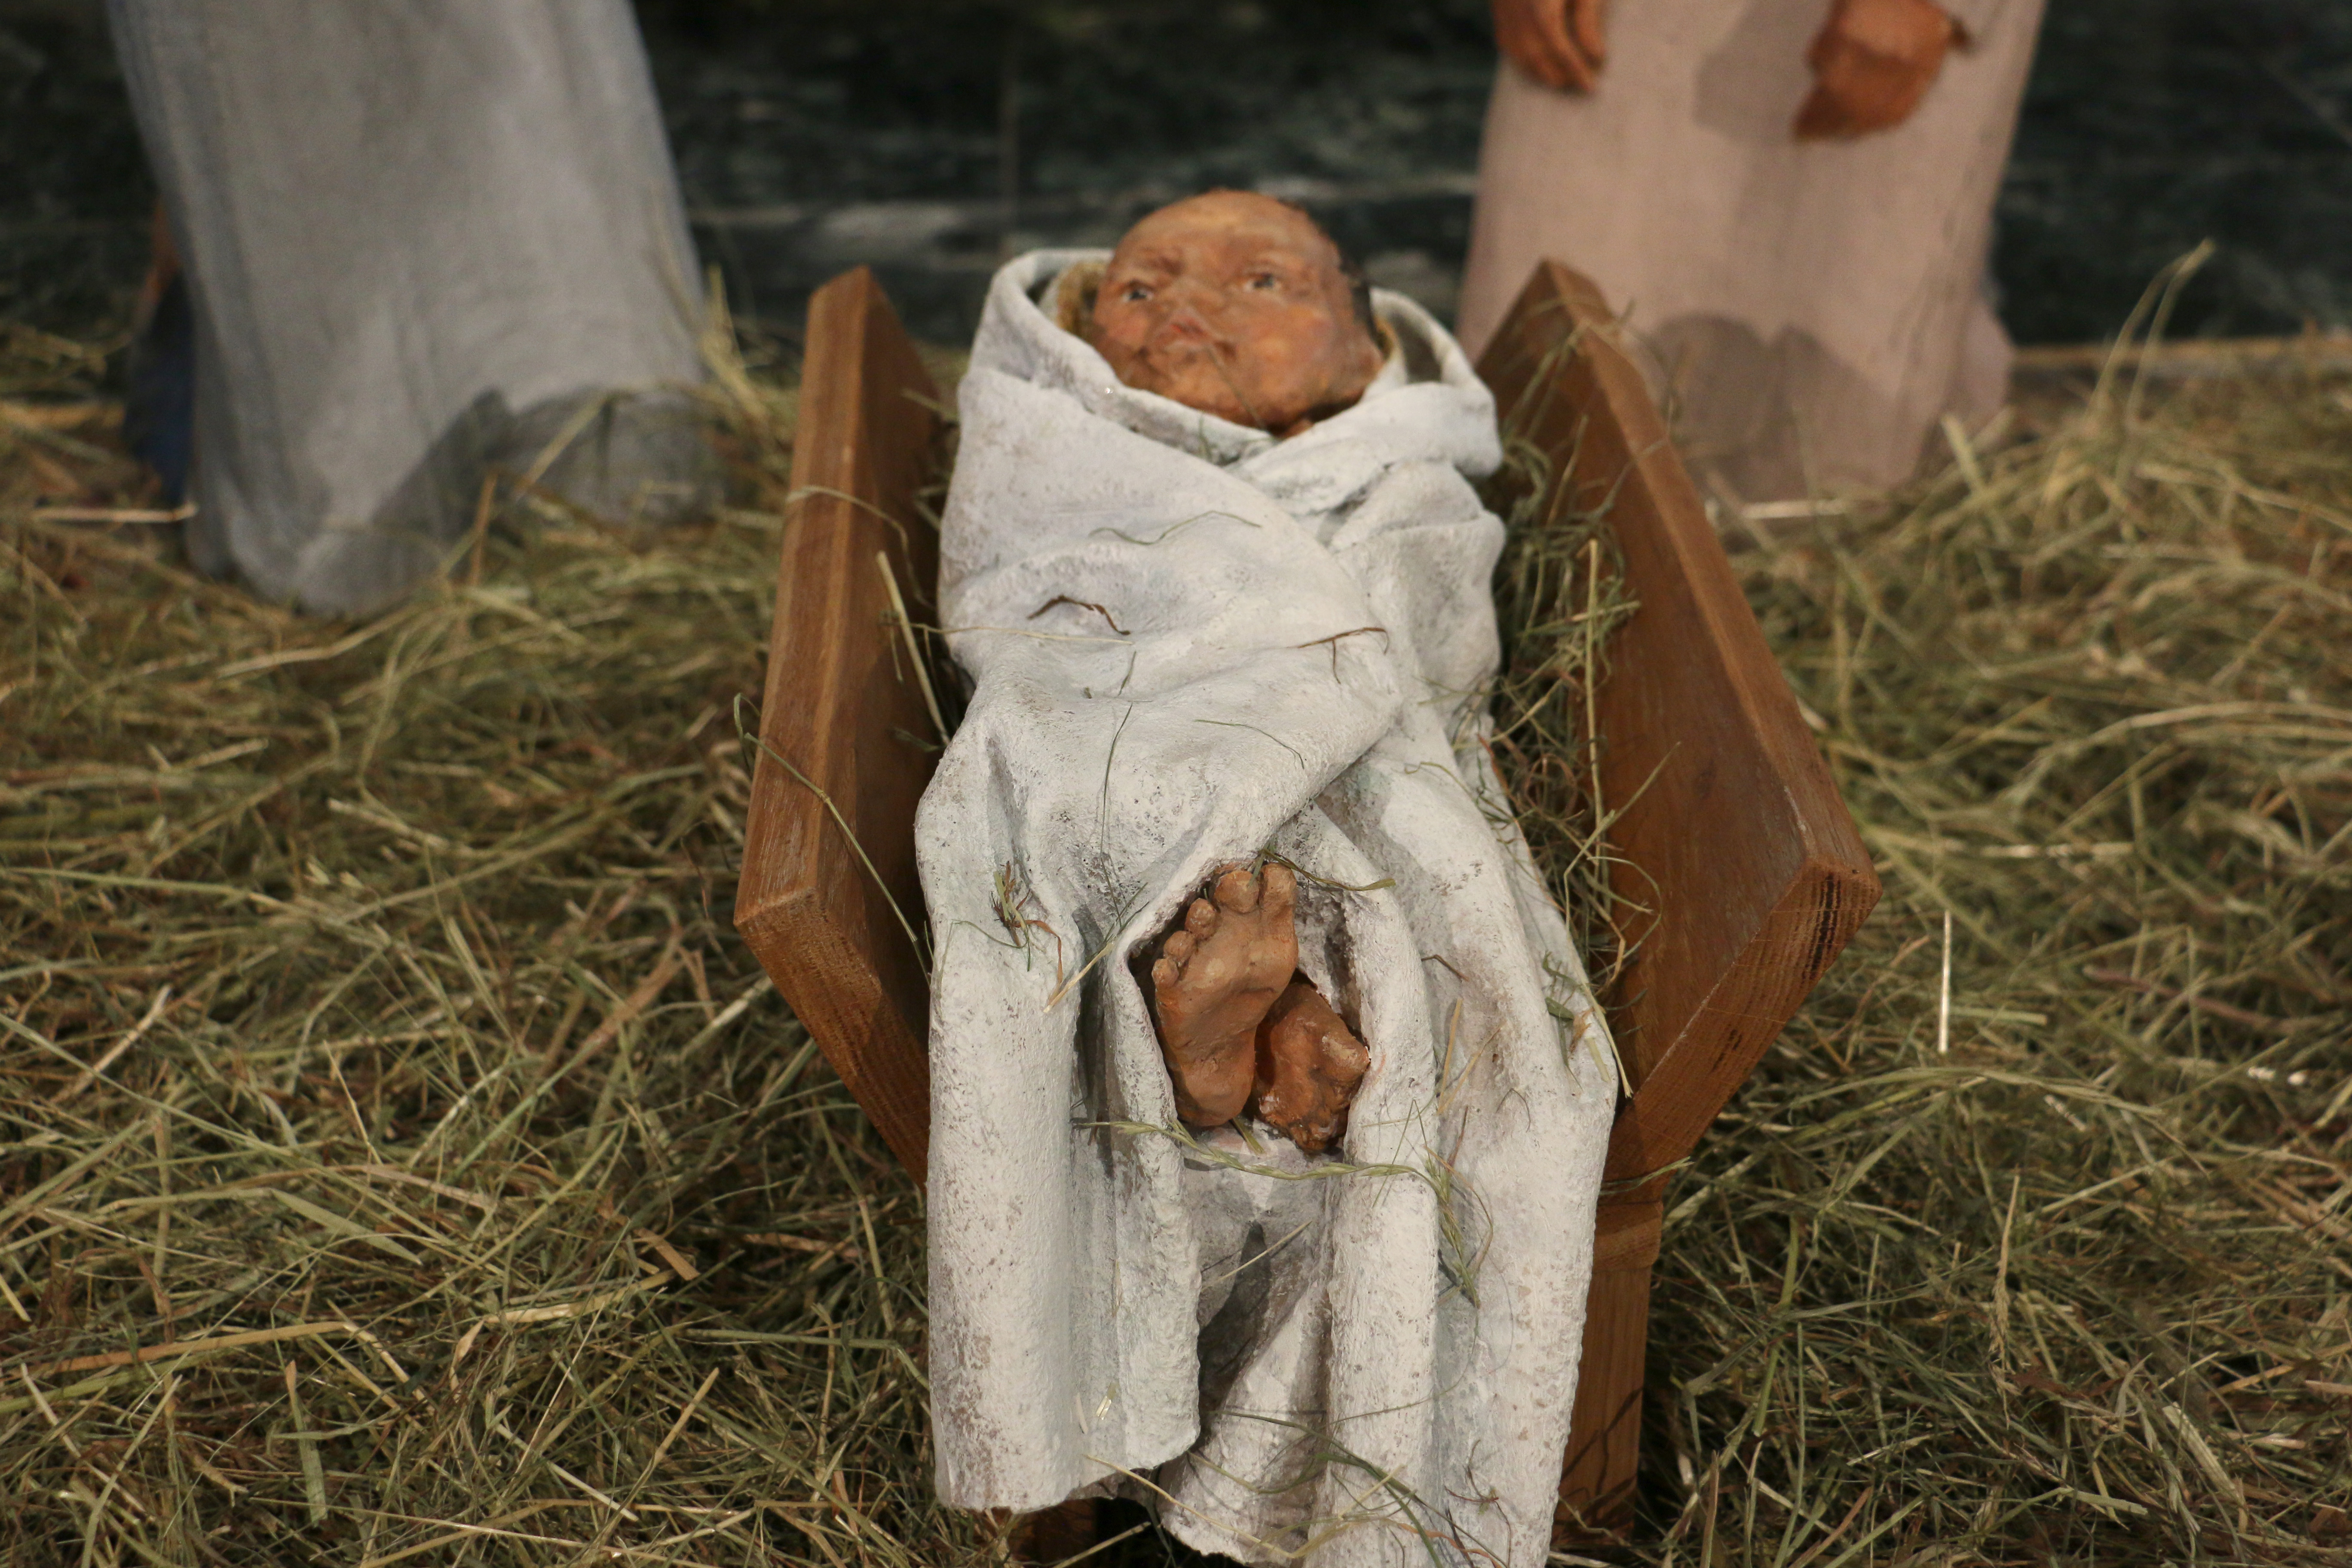 Sculpture of Christ Child showing the feet, swaddled in white cloth